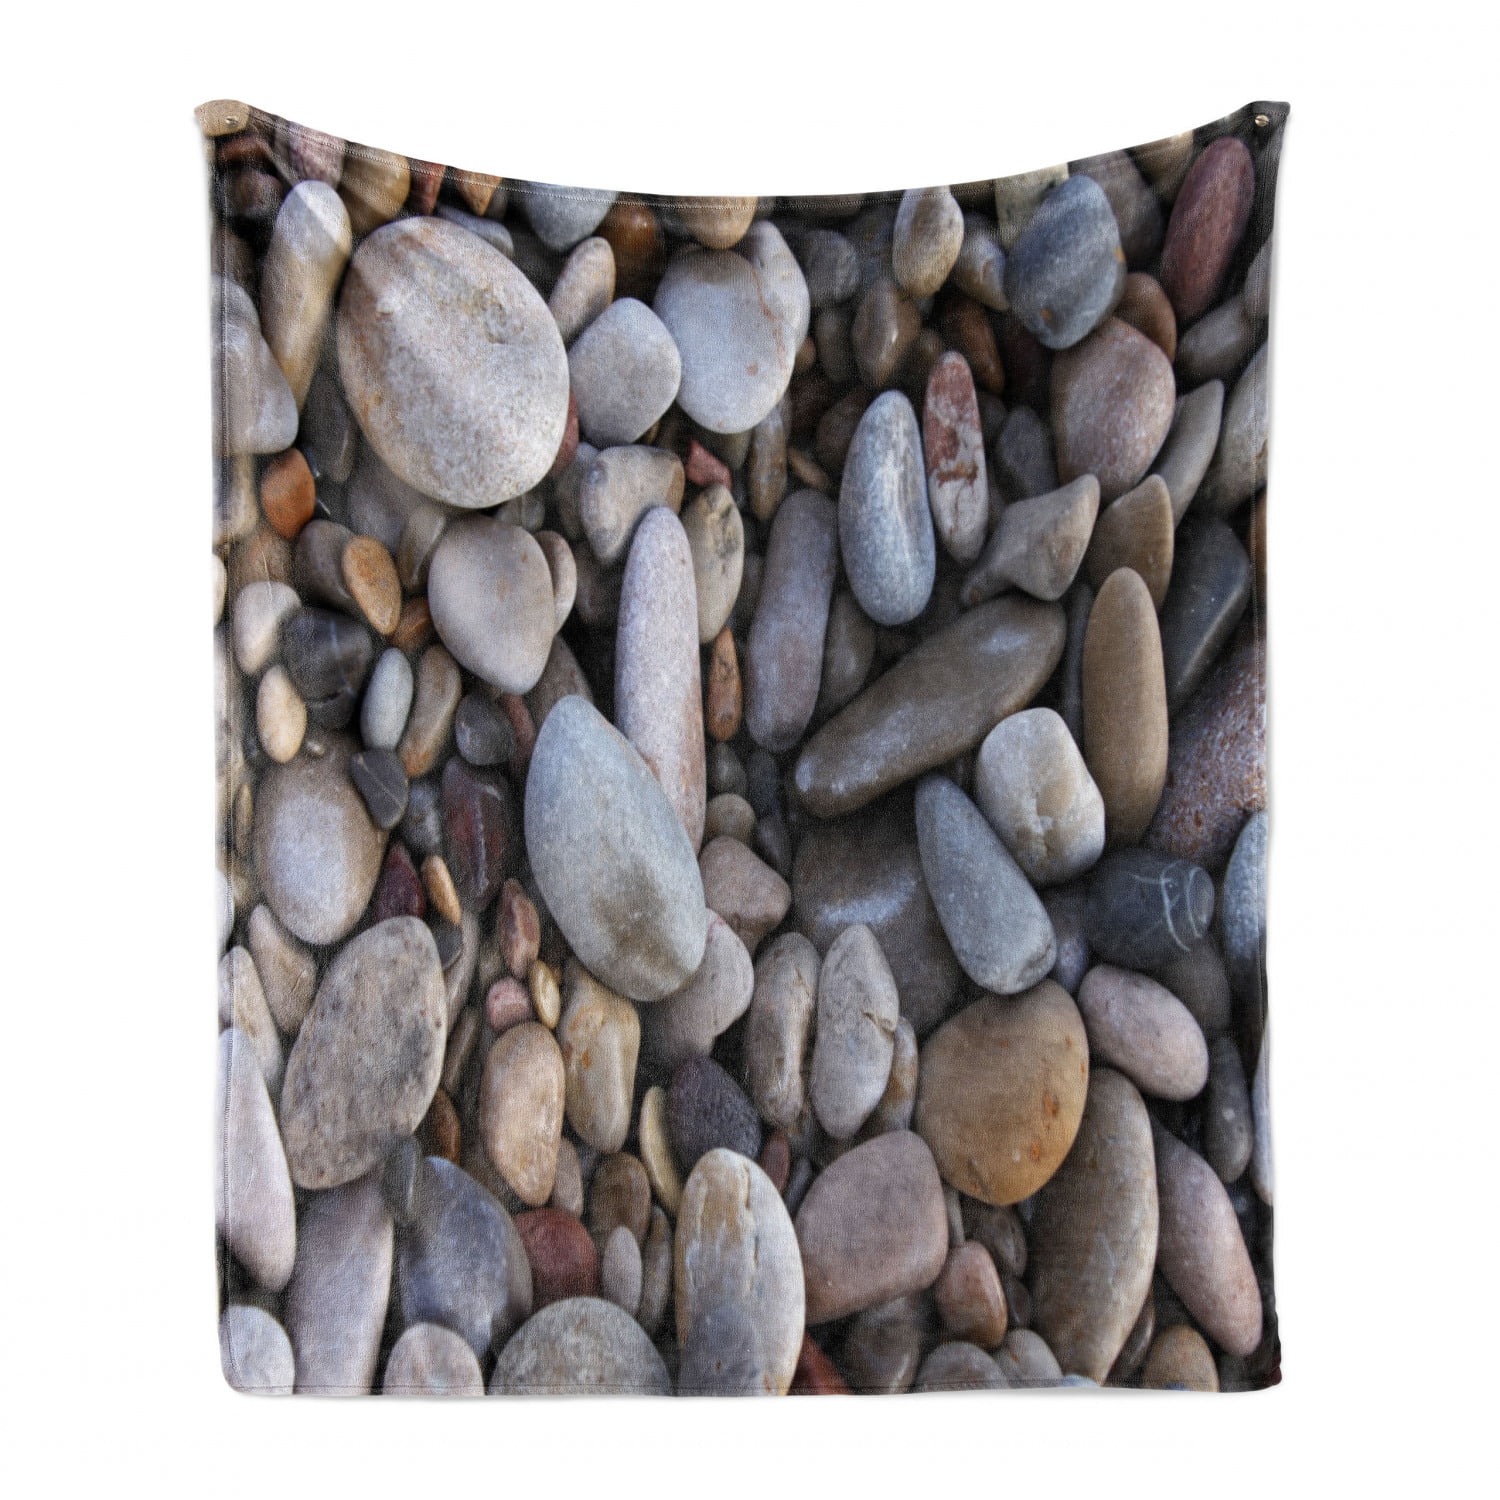 Ambesonne Rock Soft Flannel Fleece Throw Blanket Cozy Plush for Indoor and Outdoor Use Coastal Theme Pebbles by The Beach on Raked Sand Relaxation Dark Eggshell Dark Grey 70 x 90